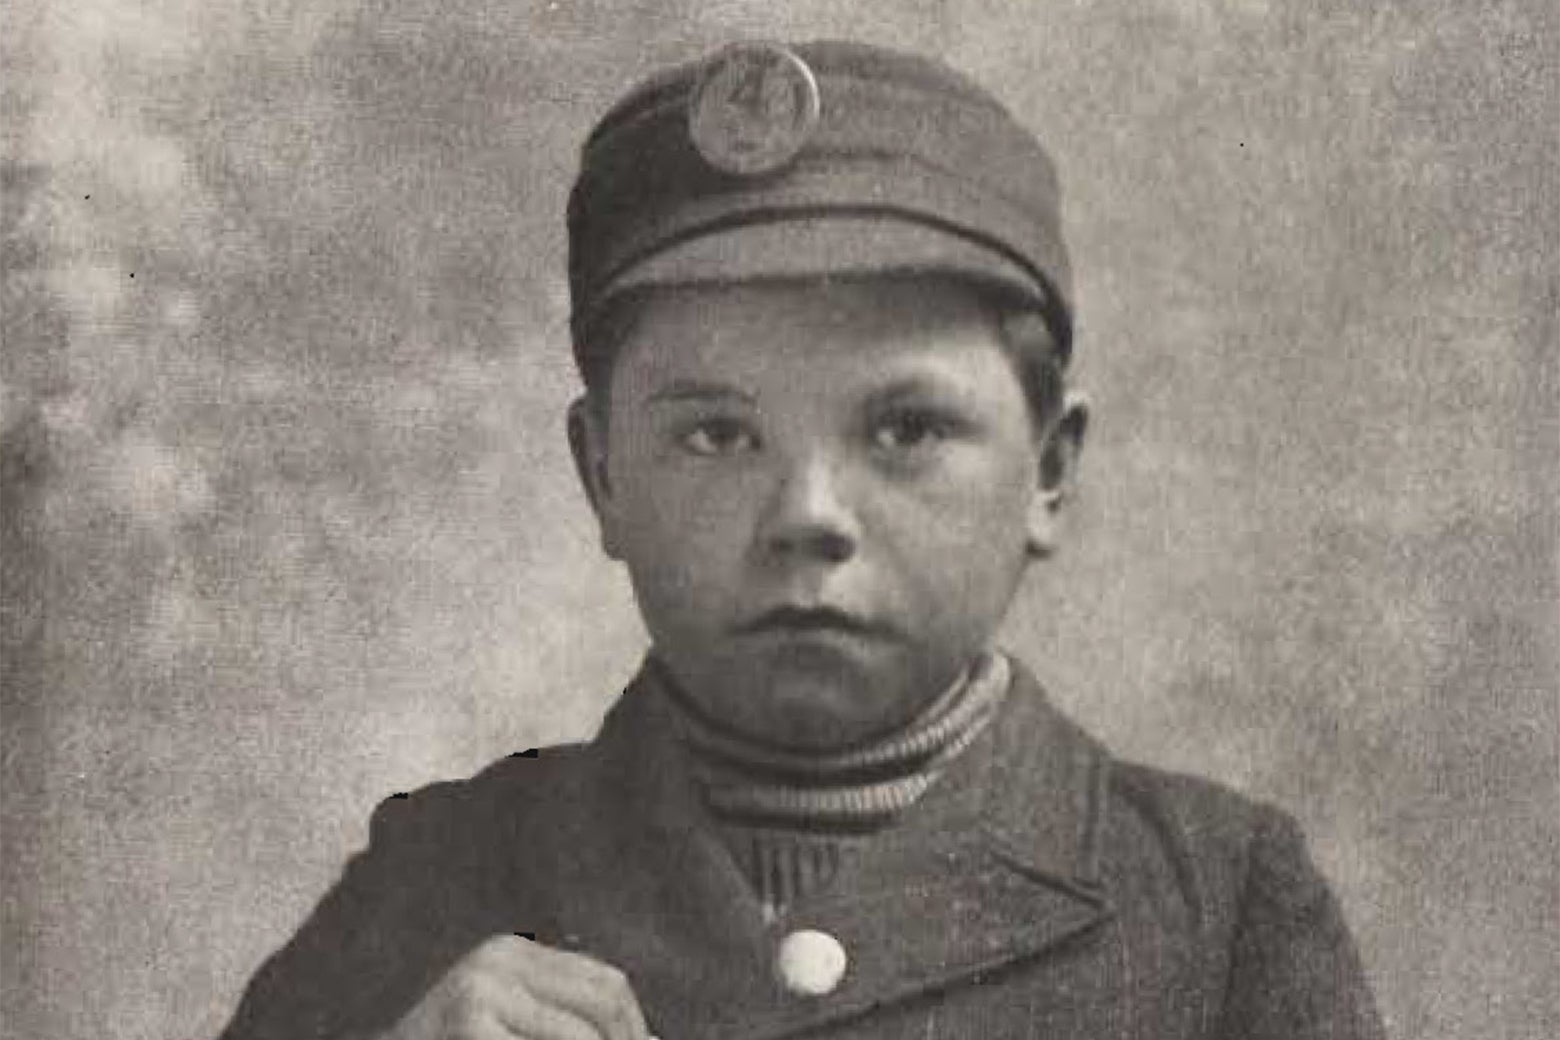 A little kid in a work uniform, as pictured in a biography of Henry Demarest Lloyd.